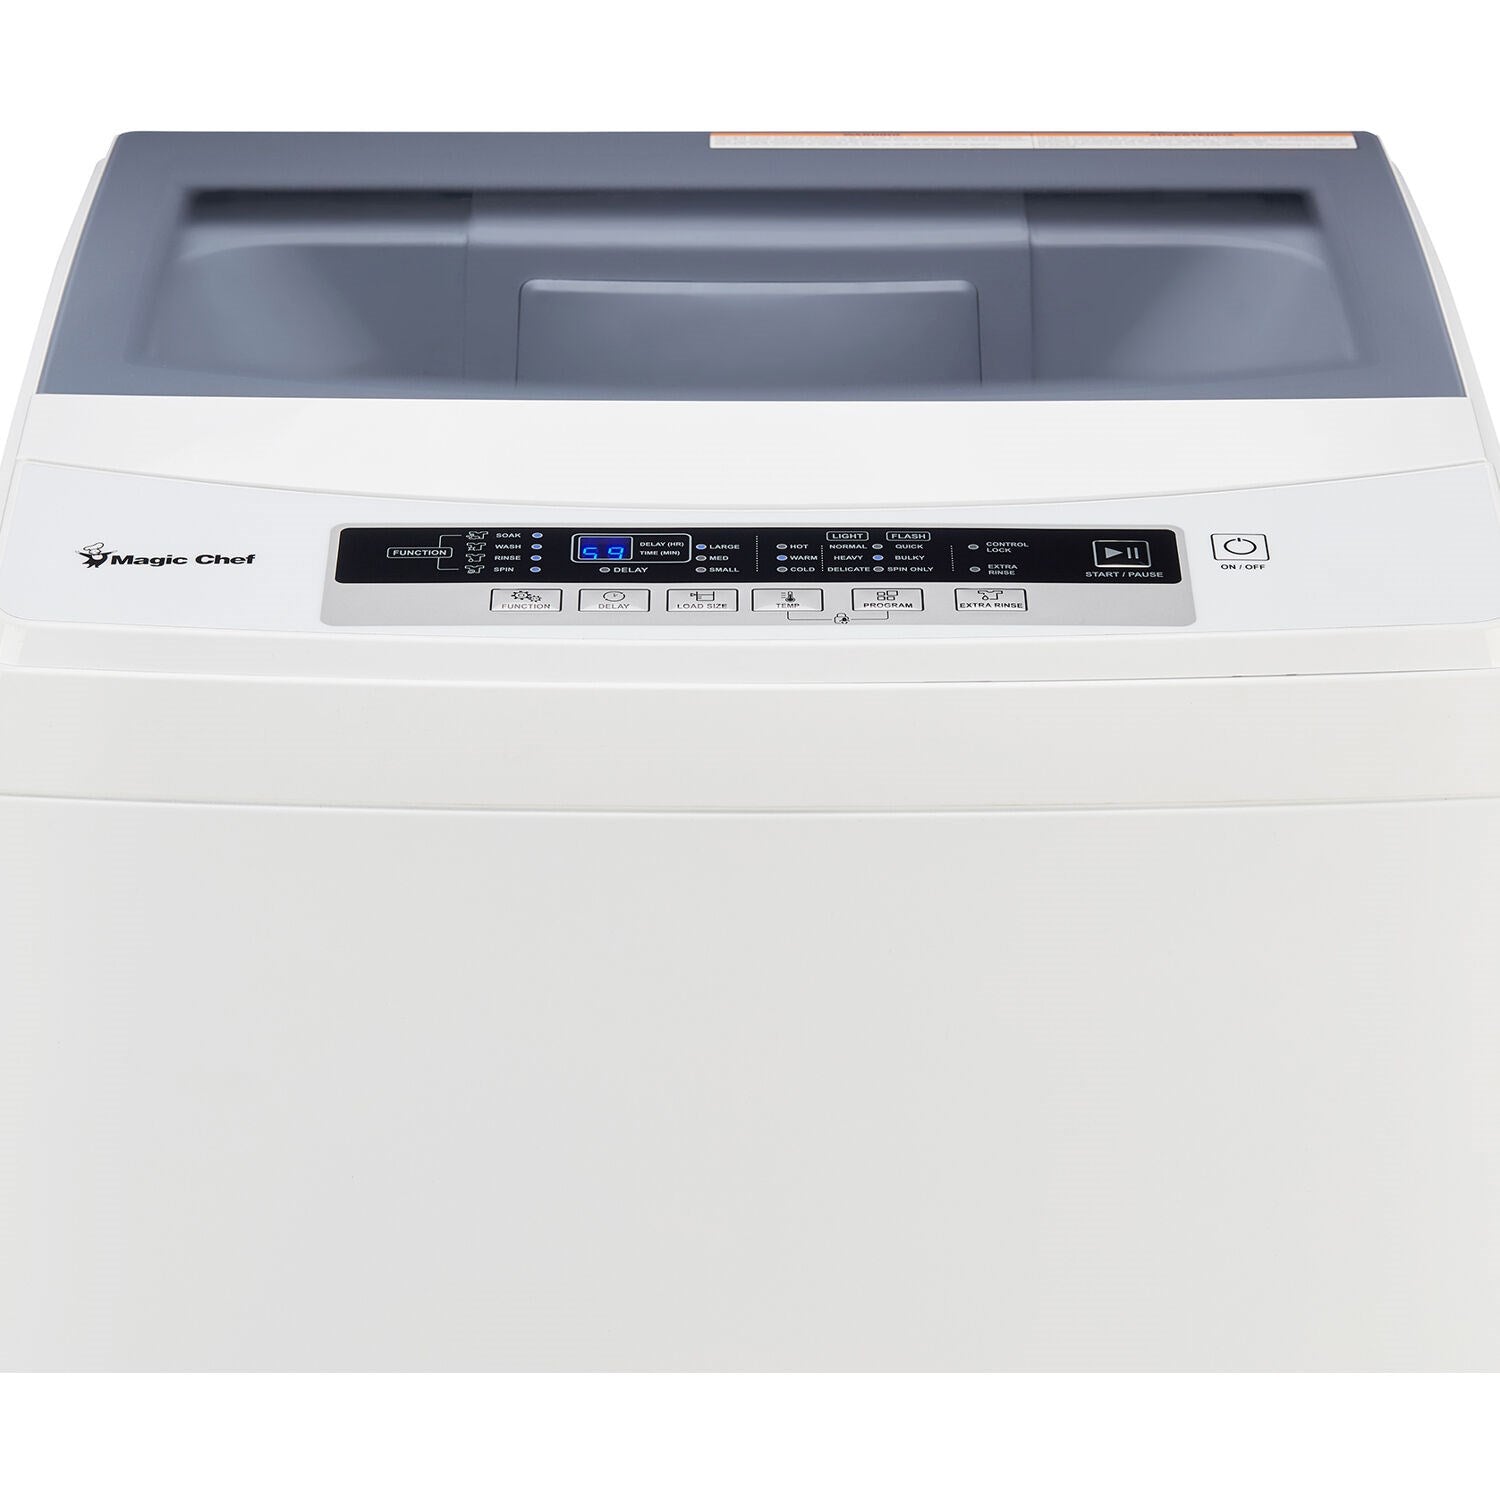 Magic Chef - 2.0 Cu Ft Top-load Compact Washer Wash Machines - MCSTCW20W6